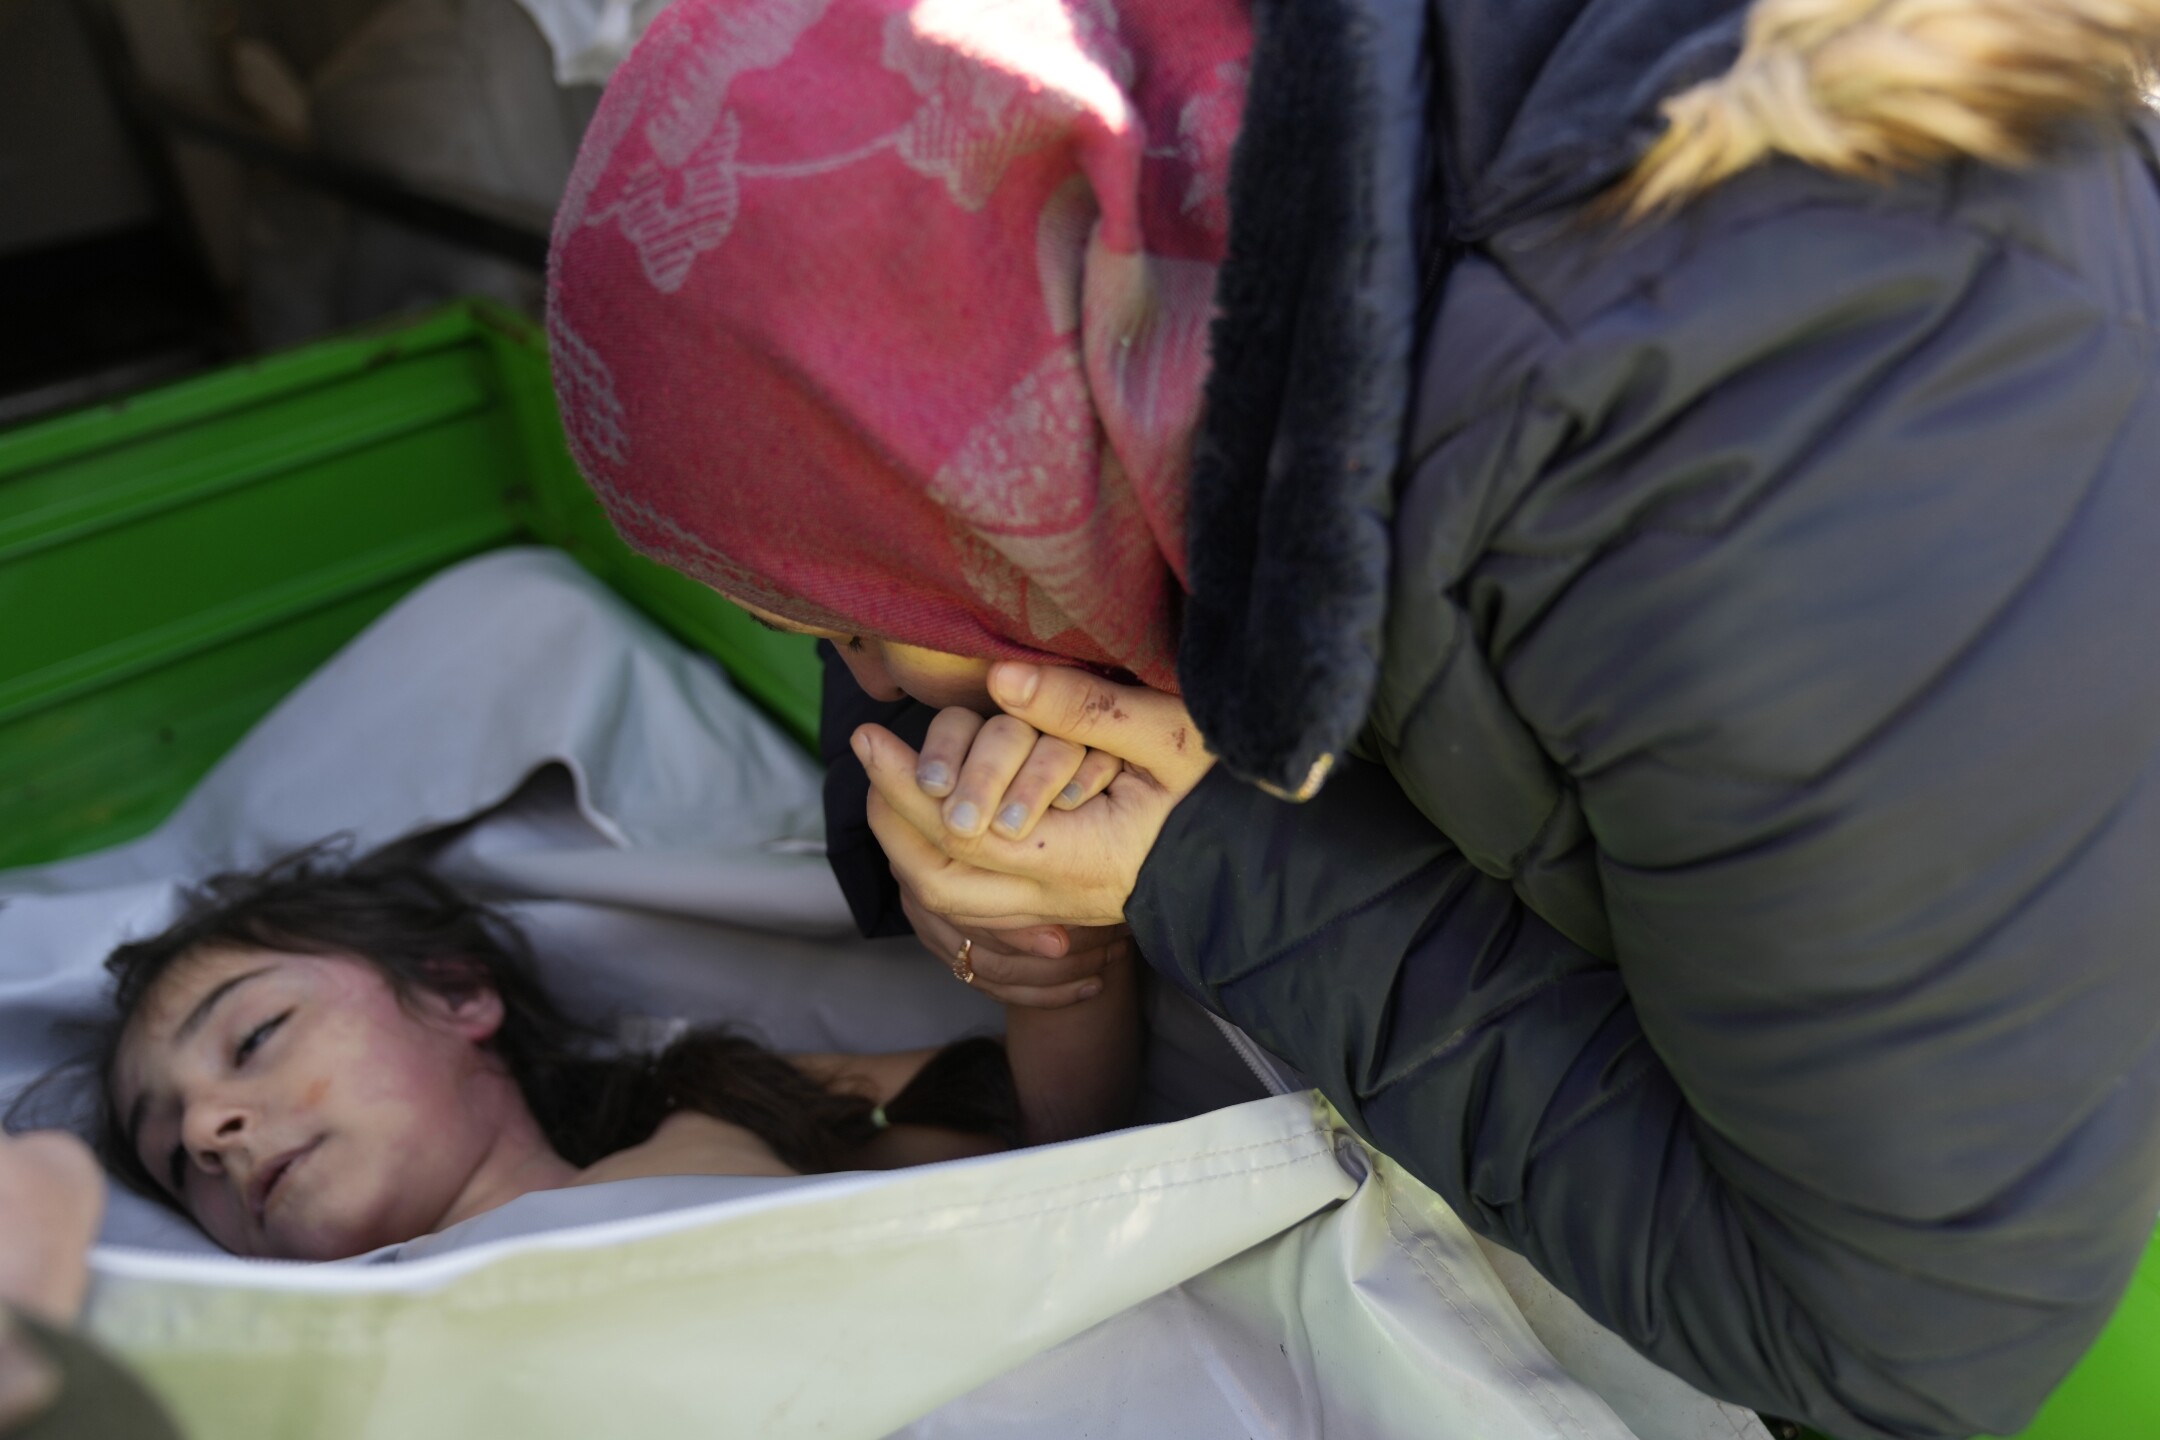 A Syrian mother kisses the hand of her daughter, who was killed in a powerful earthquake that struck southern Turkey and Syria three days earlier, at the Turkish crossing point of Cilvegozu, in Reyhanli, southeastern Turkey, on the border of Syria, on Feb. 9, 2023. The girl's body will be transported to Syria for burial. (AP Photo/Hussein Malla)